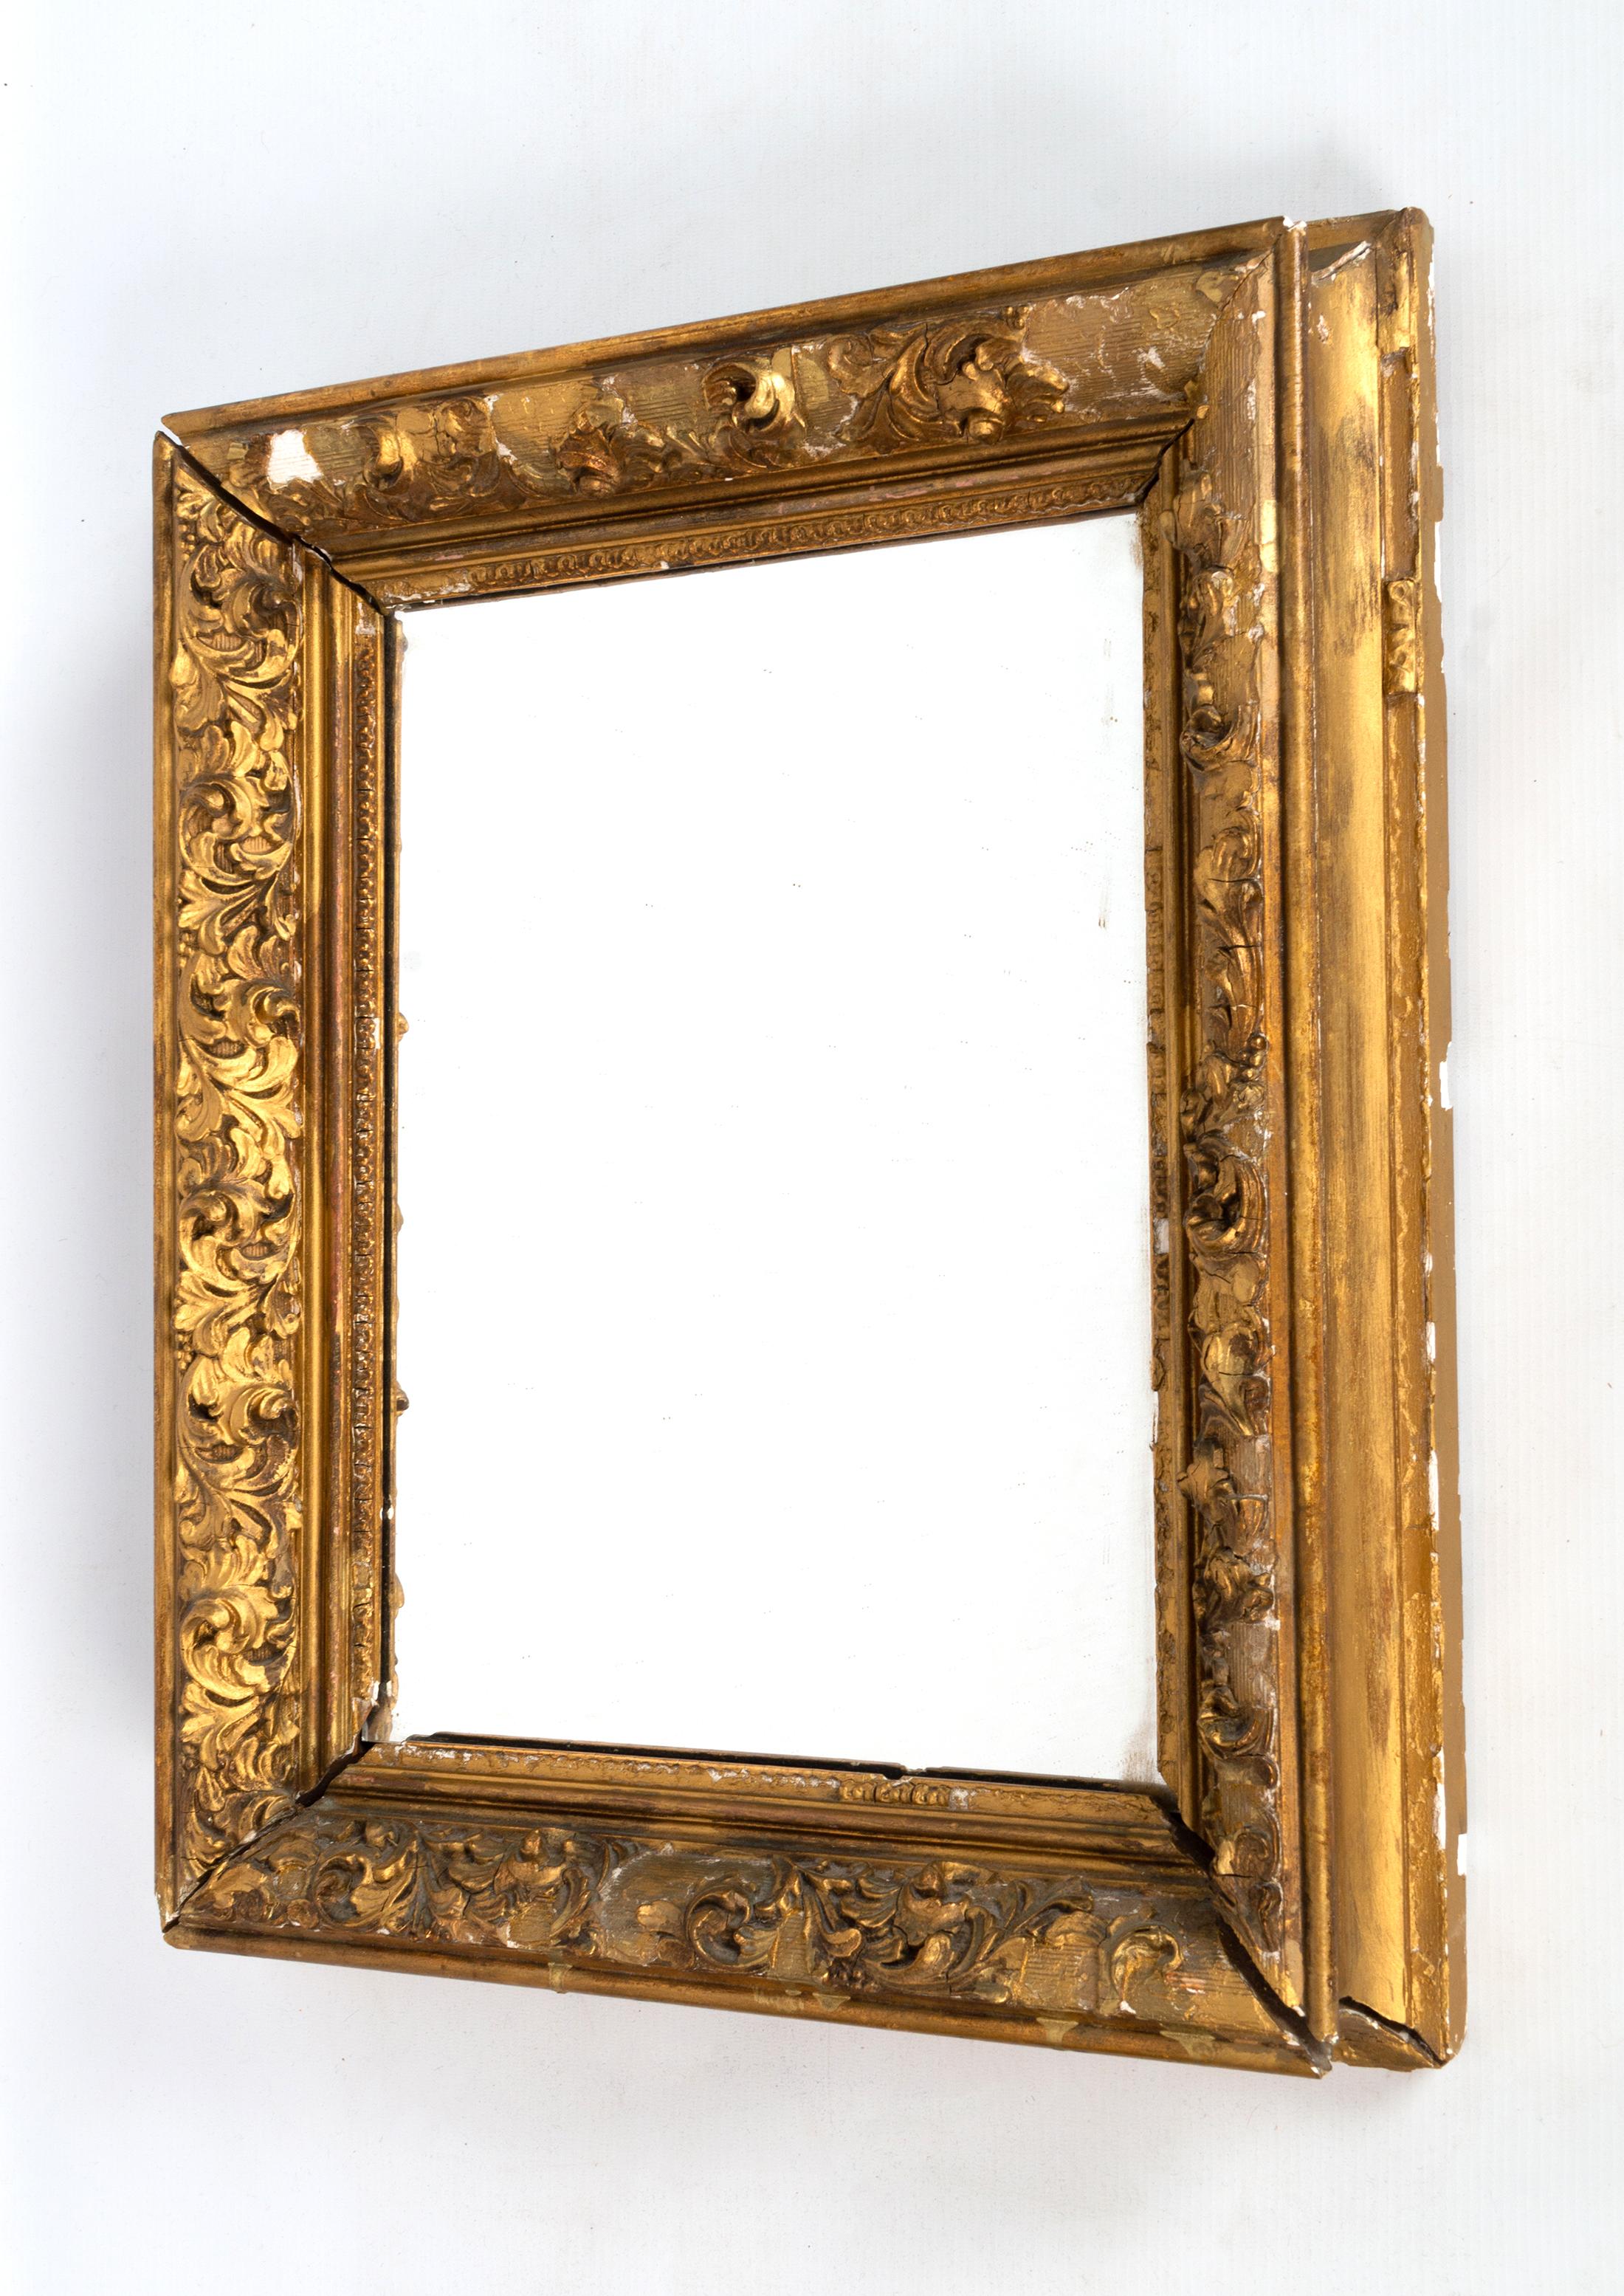 French 19th Century Wall Mirror Gesso Distressed Frame In Distressed Condition For Sale In London, GB